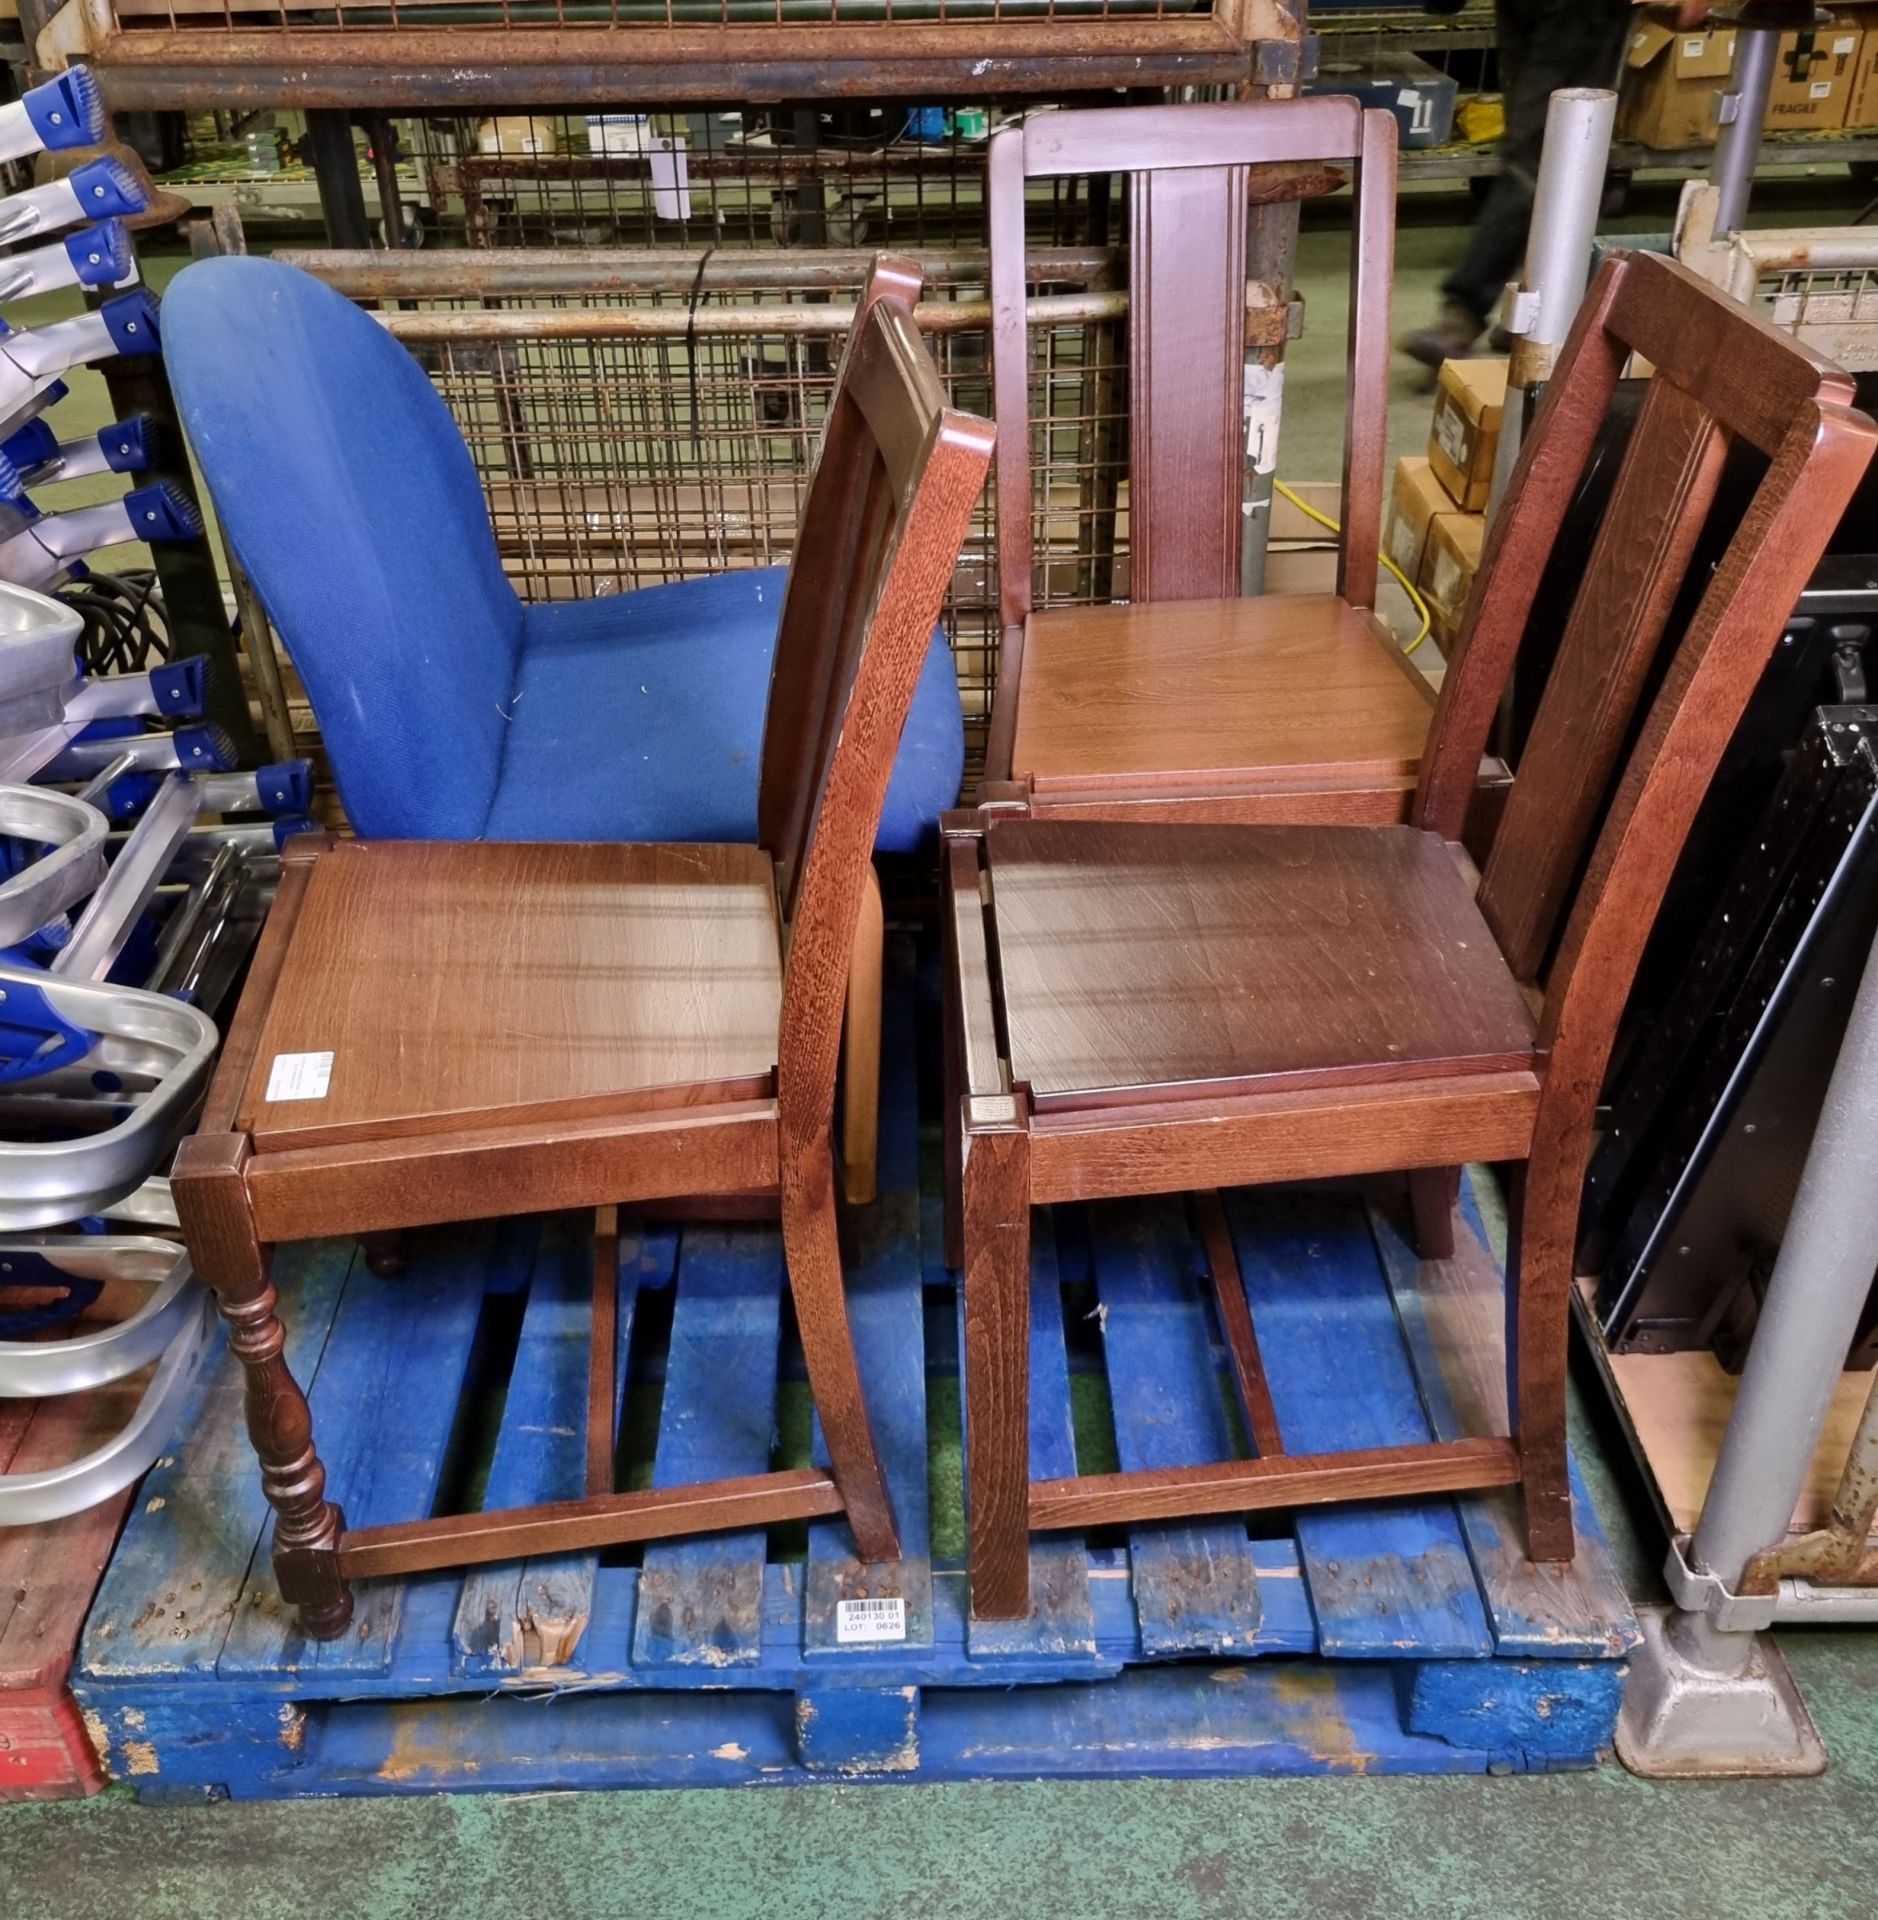 3x Brown wooden chairs, 1x Blue padded chair